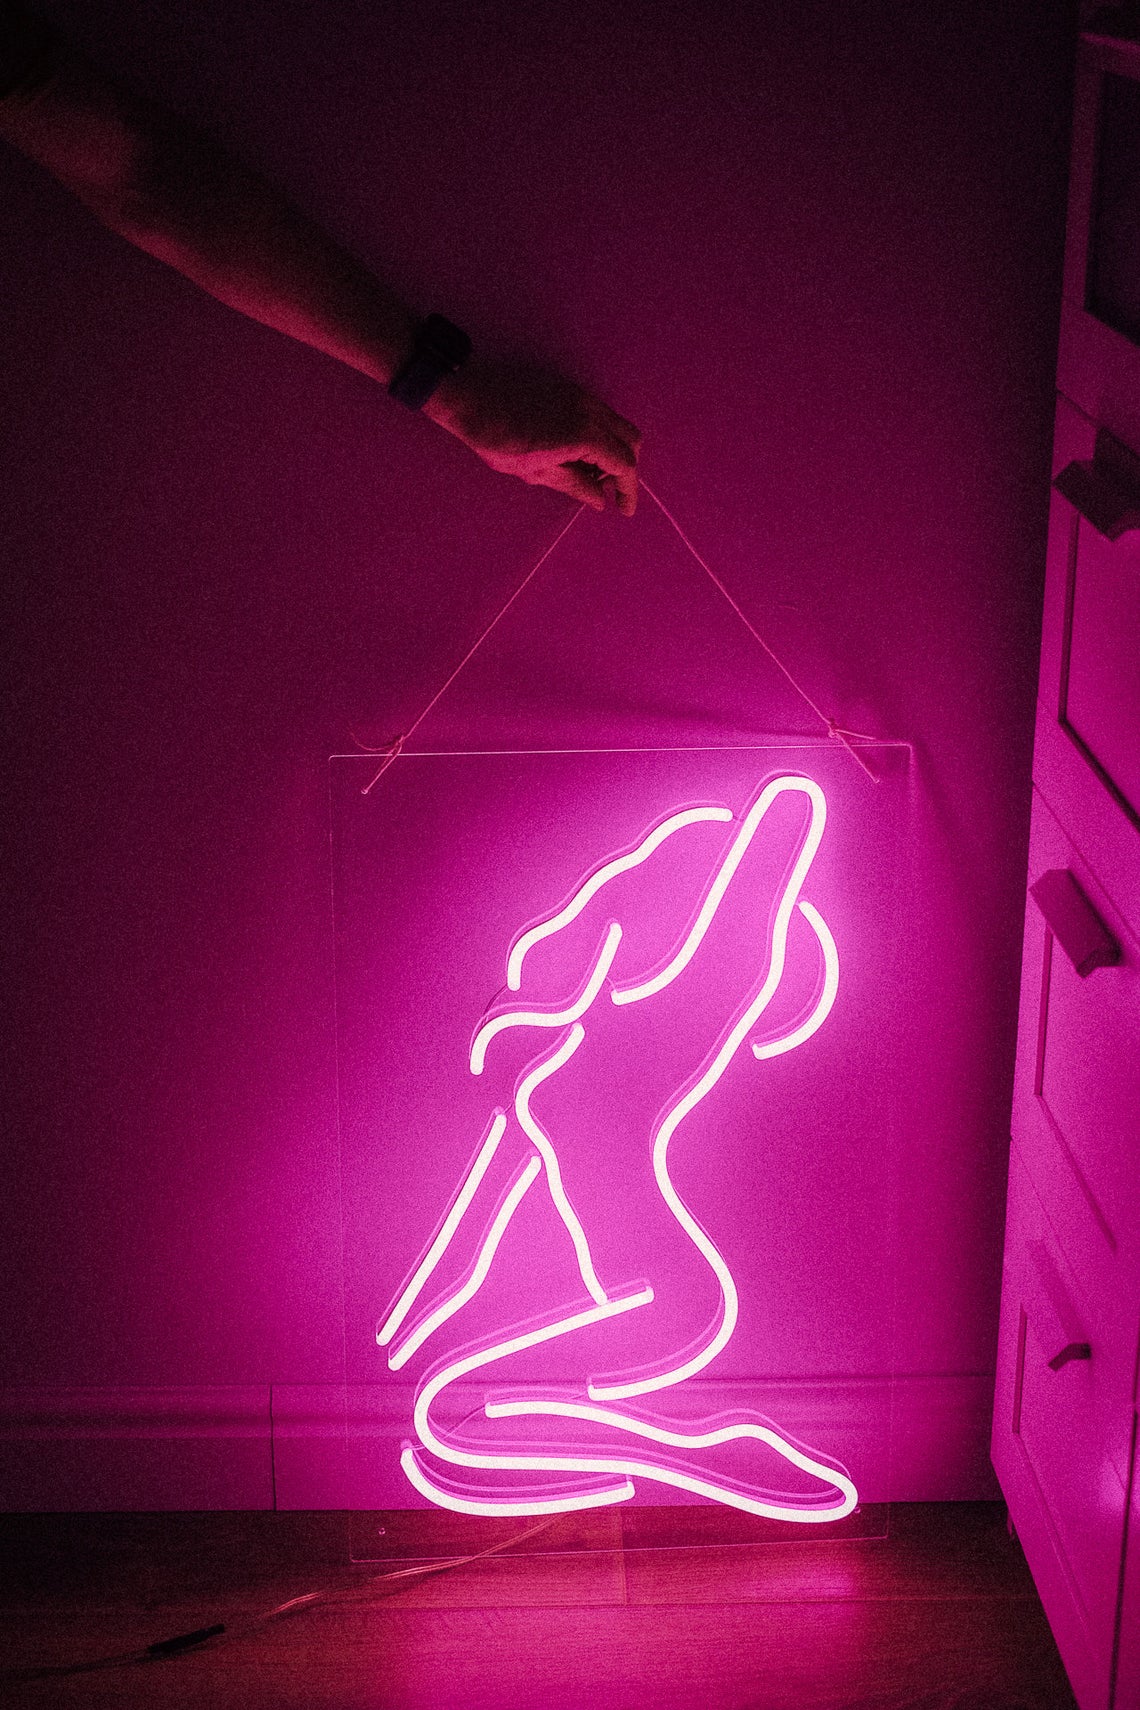 Sexy girl woman pink neon sign for bar, night club, party, erotic striptease